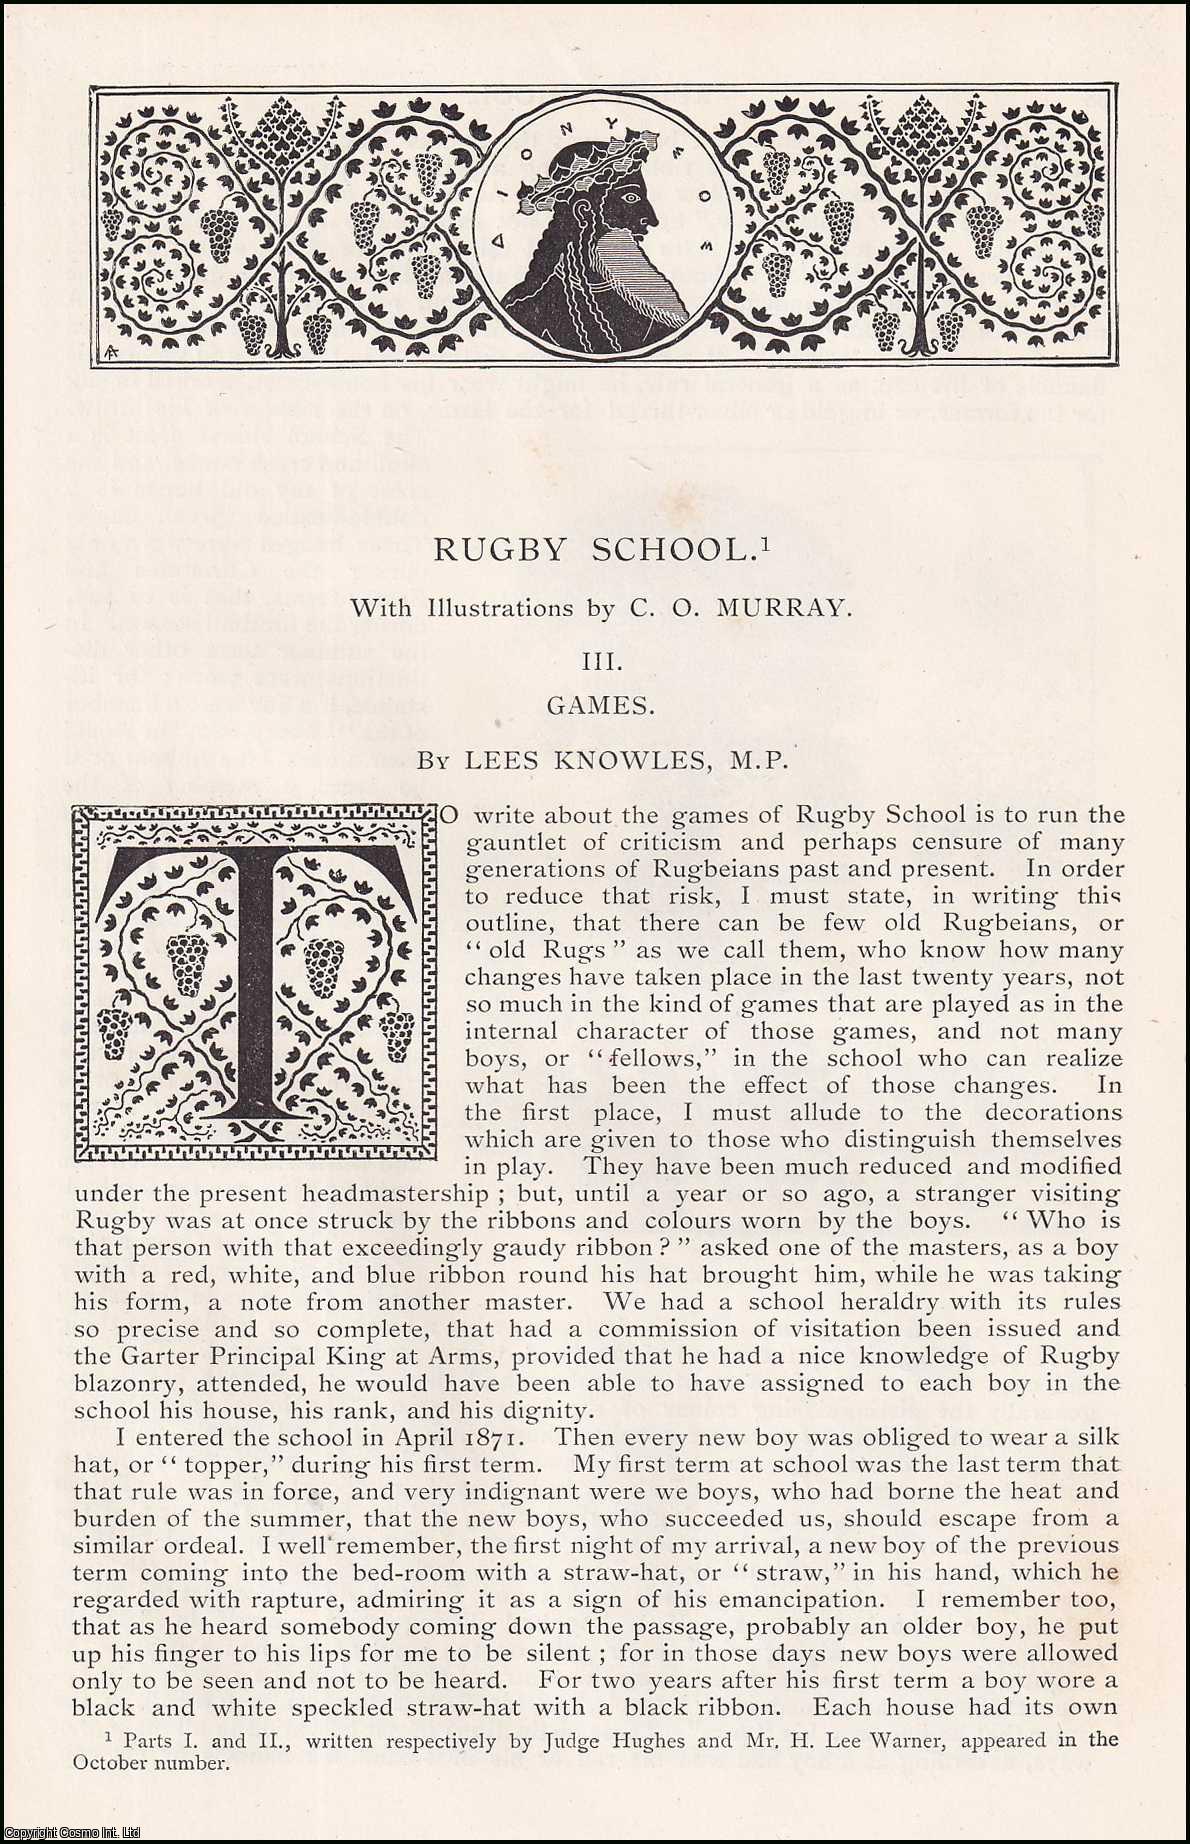 Lees Knowles, illustrations by C.O. Murray - Rugby School; Games. An original article from the English Illustrated Magazine, 1892.